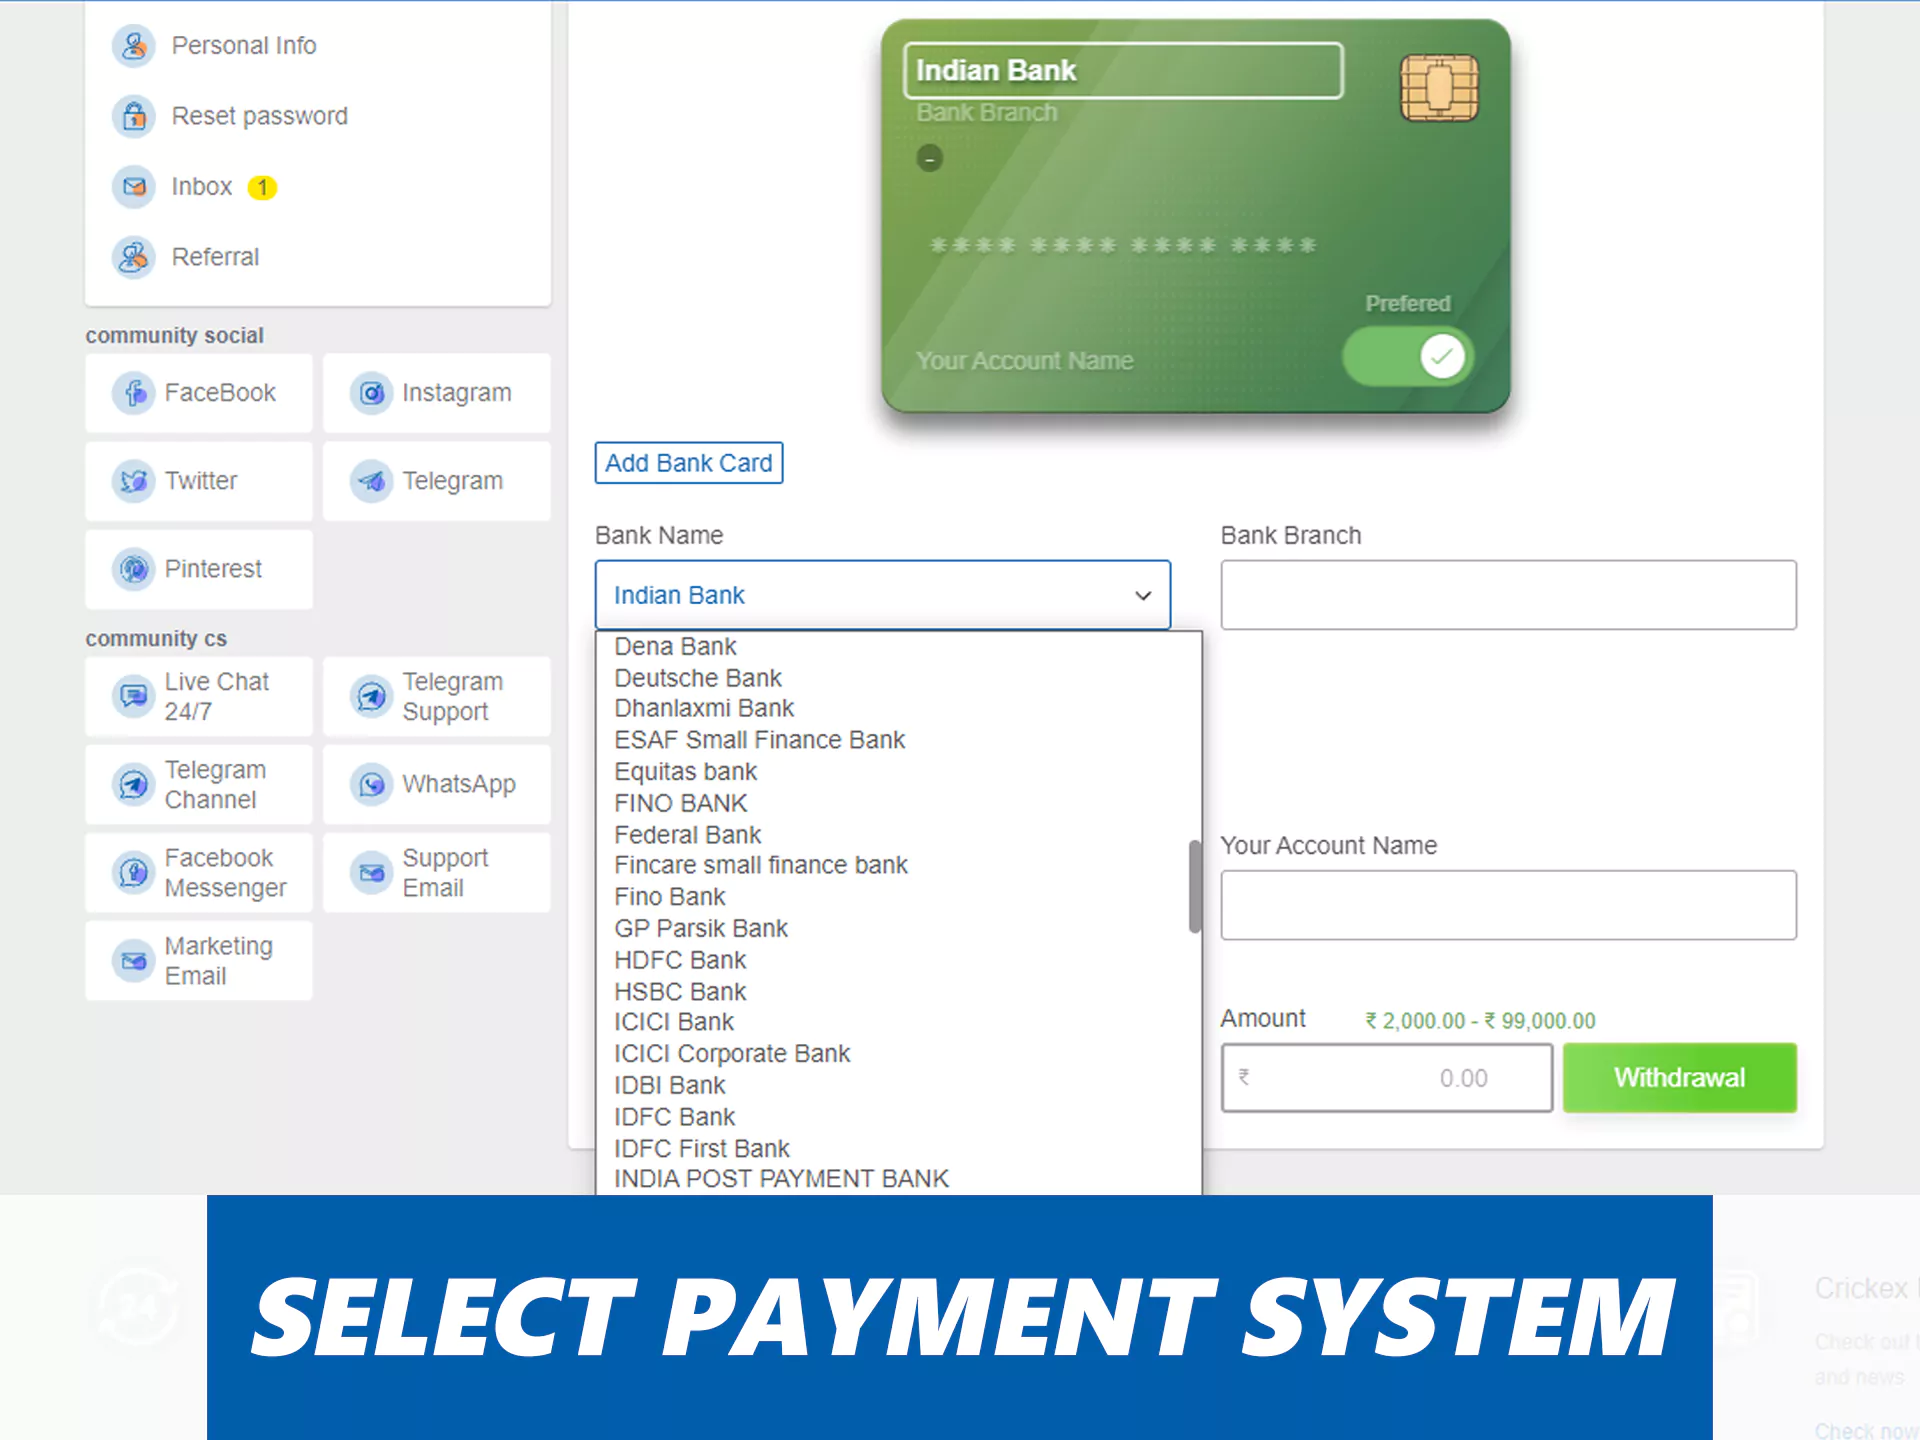 Select your favourite payment system.